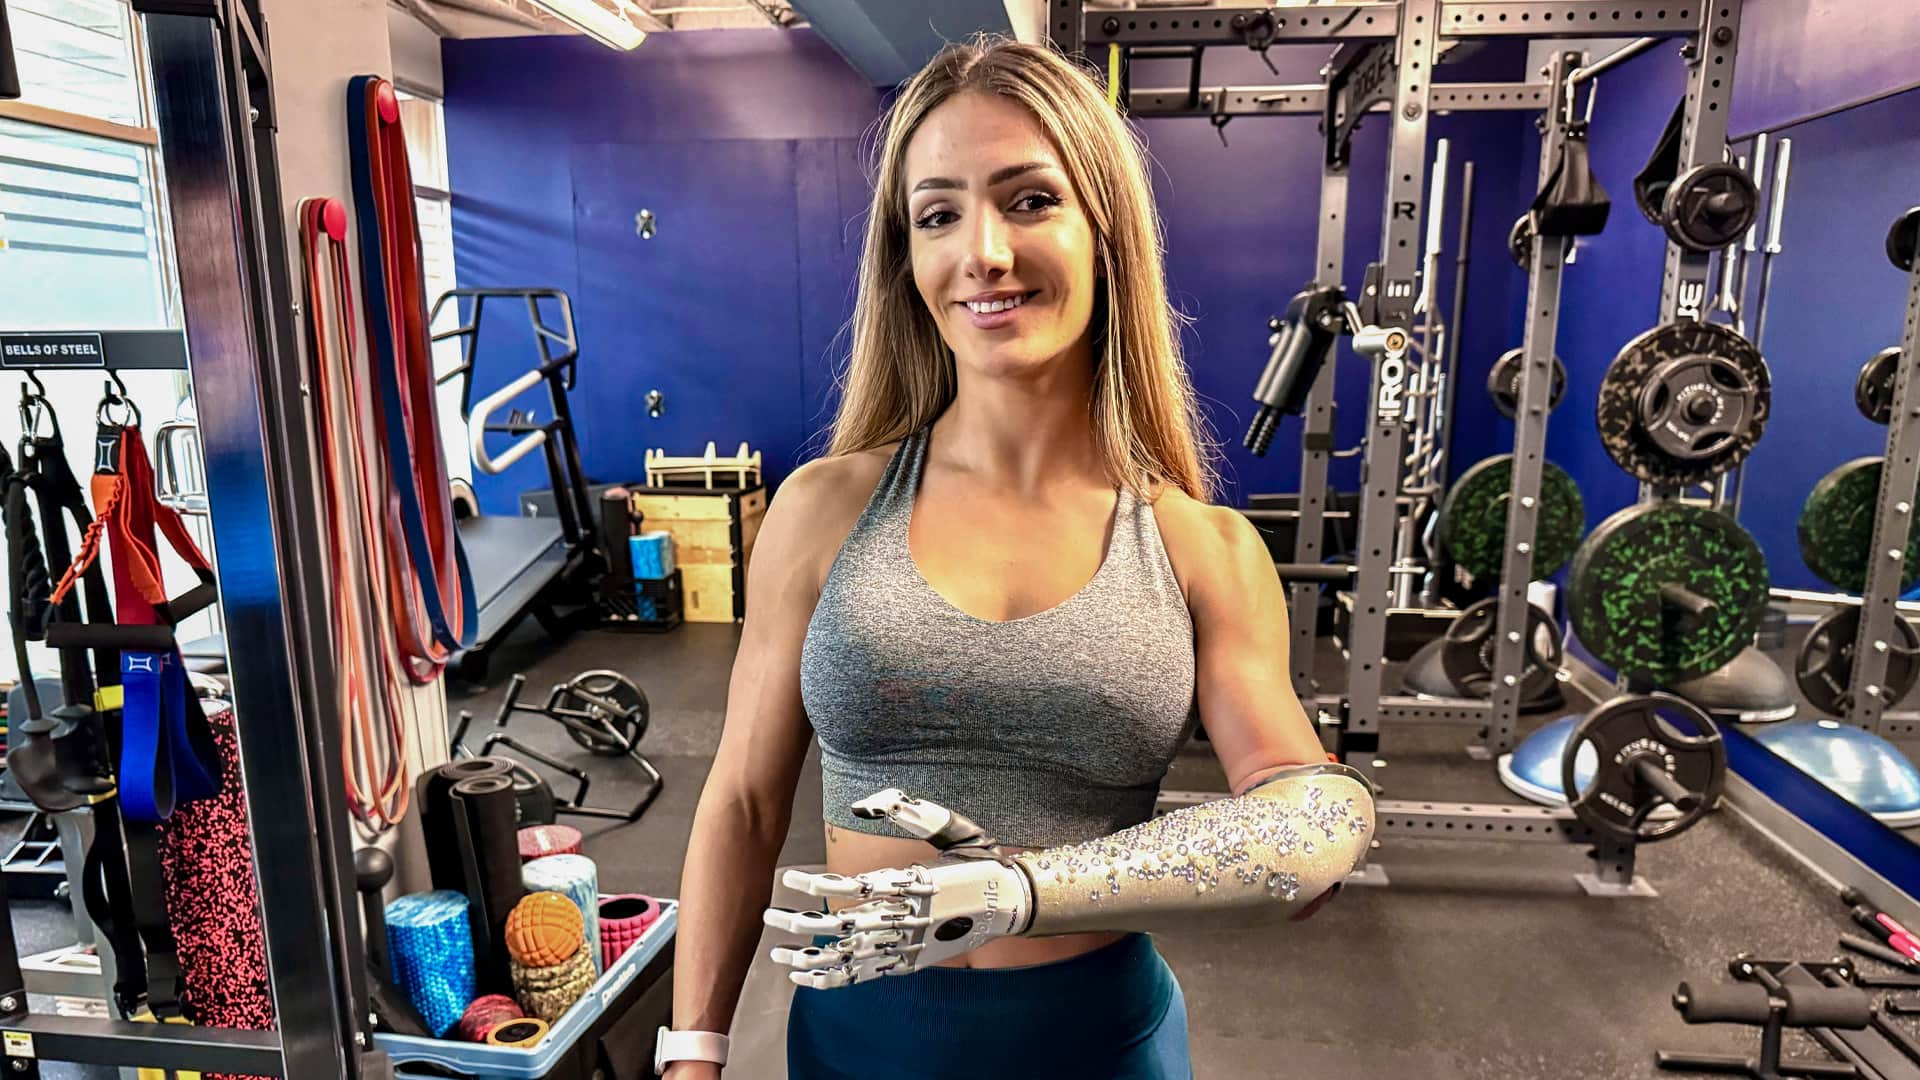 Bodybuilder with bionic prosthetic ‘an inspiration’ as gym trainer